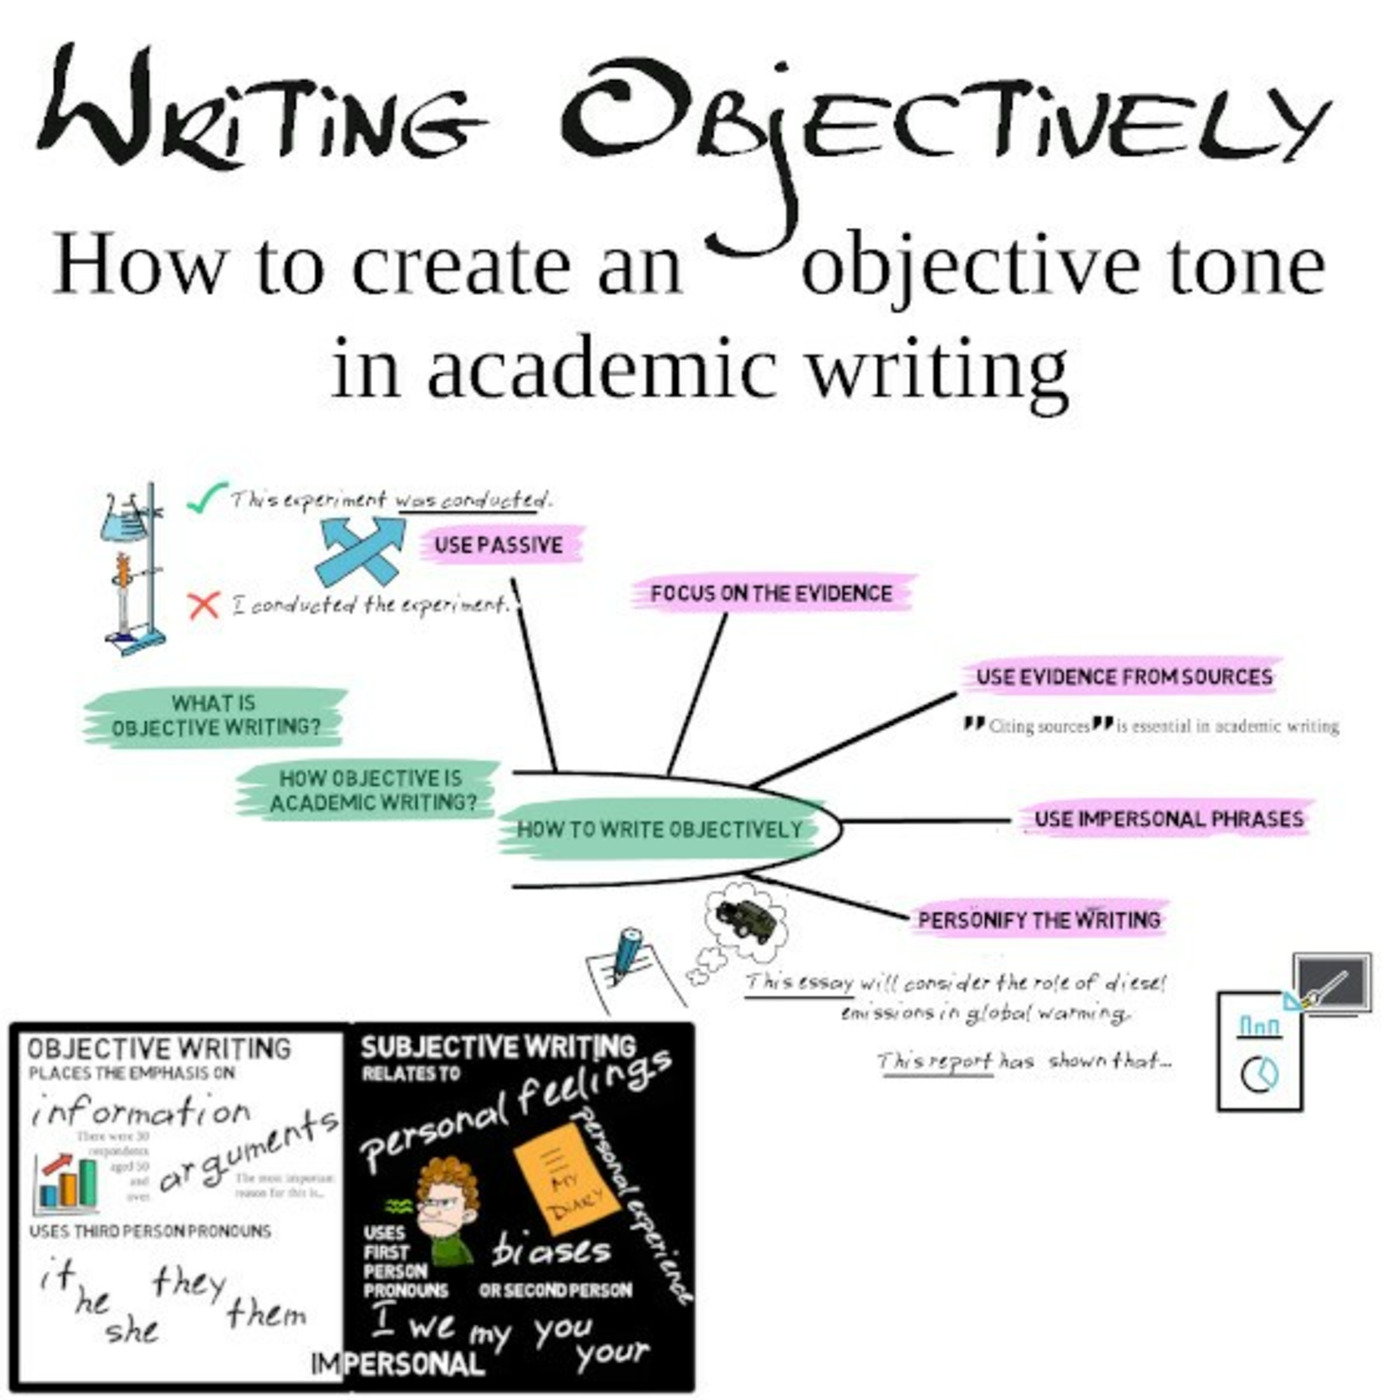 Episode 54: Writing objectively: How to create an objective tone in academic writing